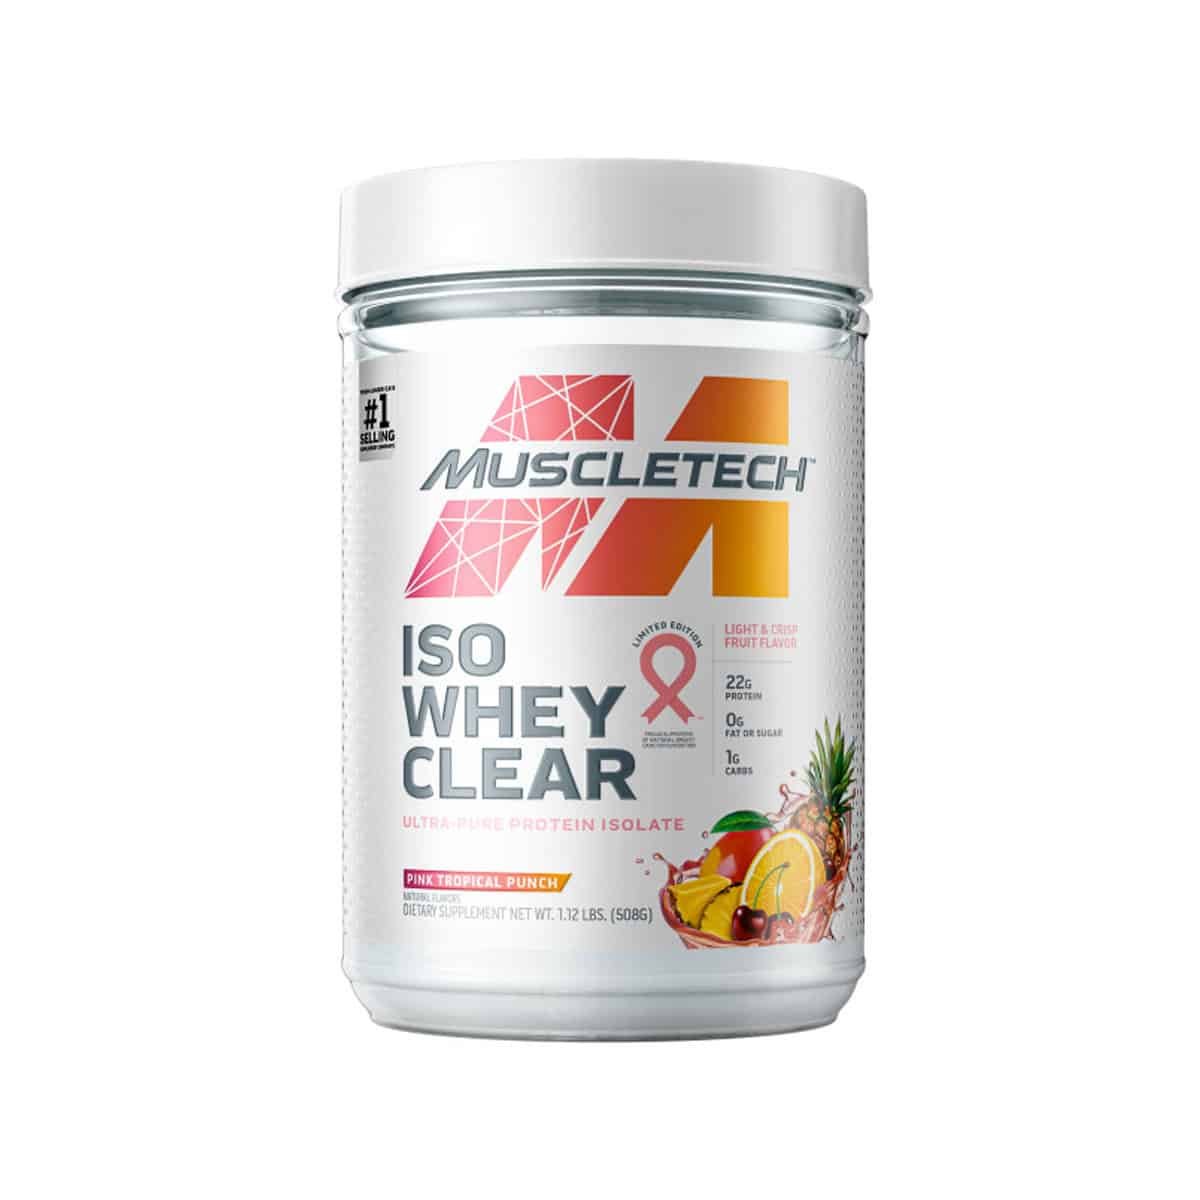 Muscletech Iso Whey Clear Pink Tropical Punch - 508g